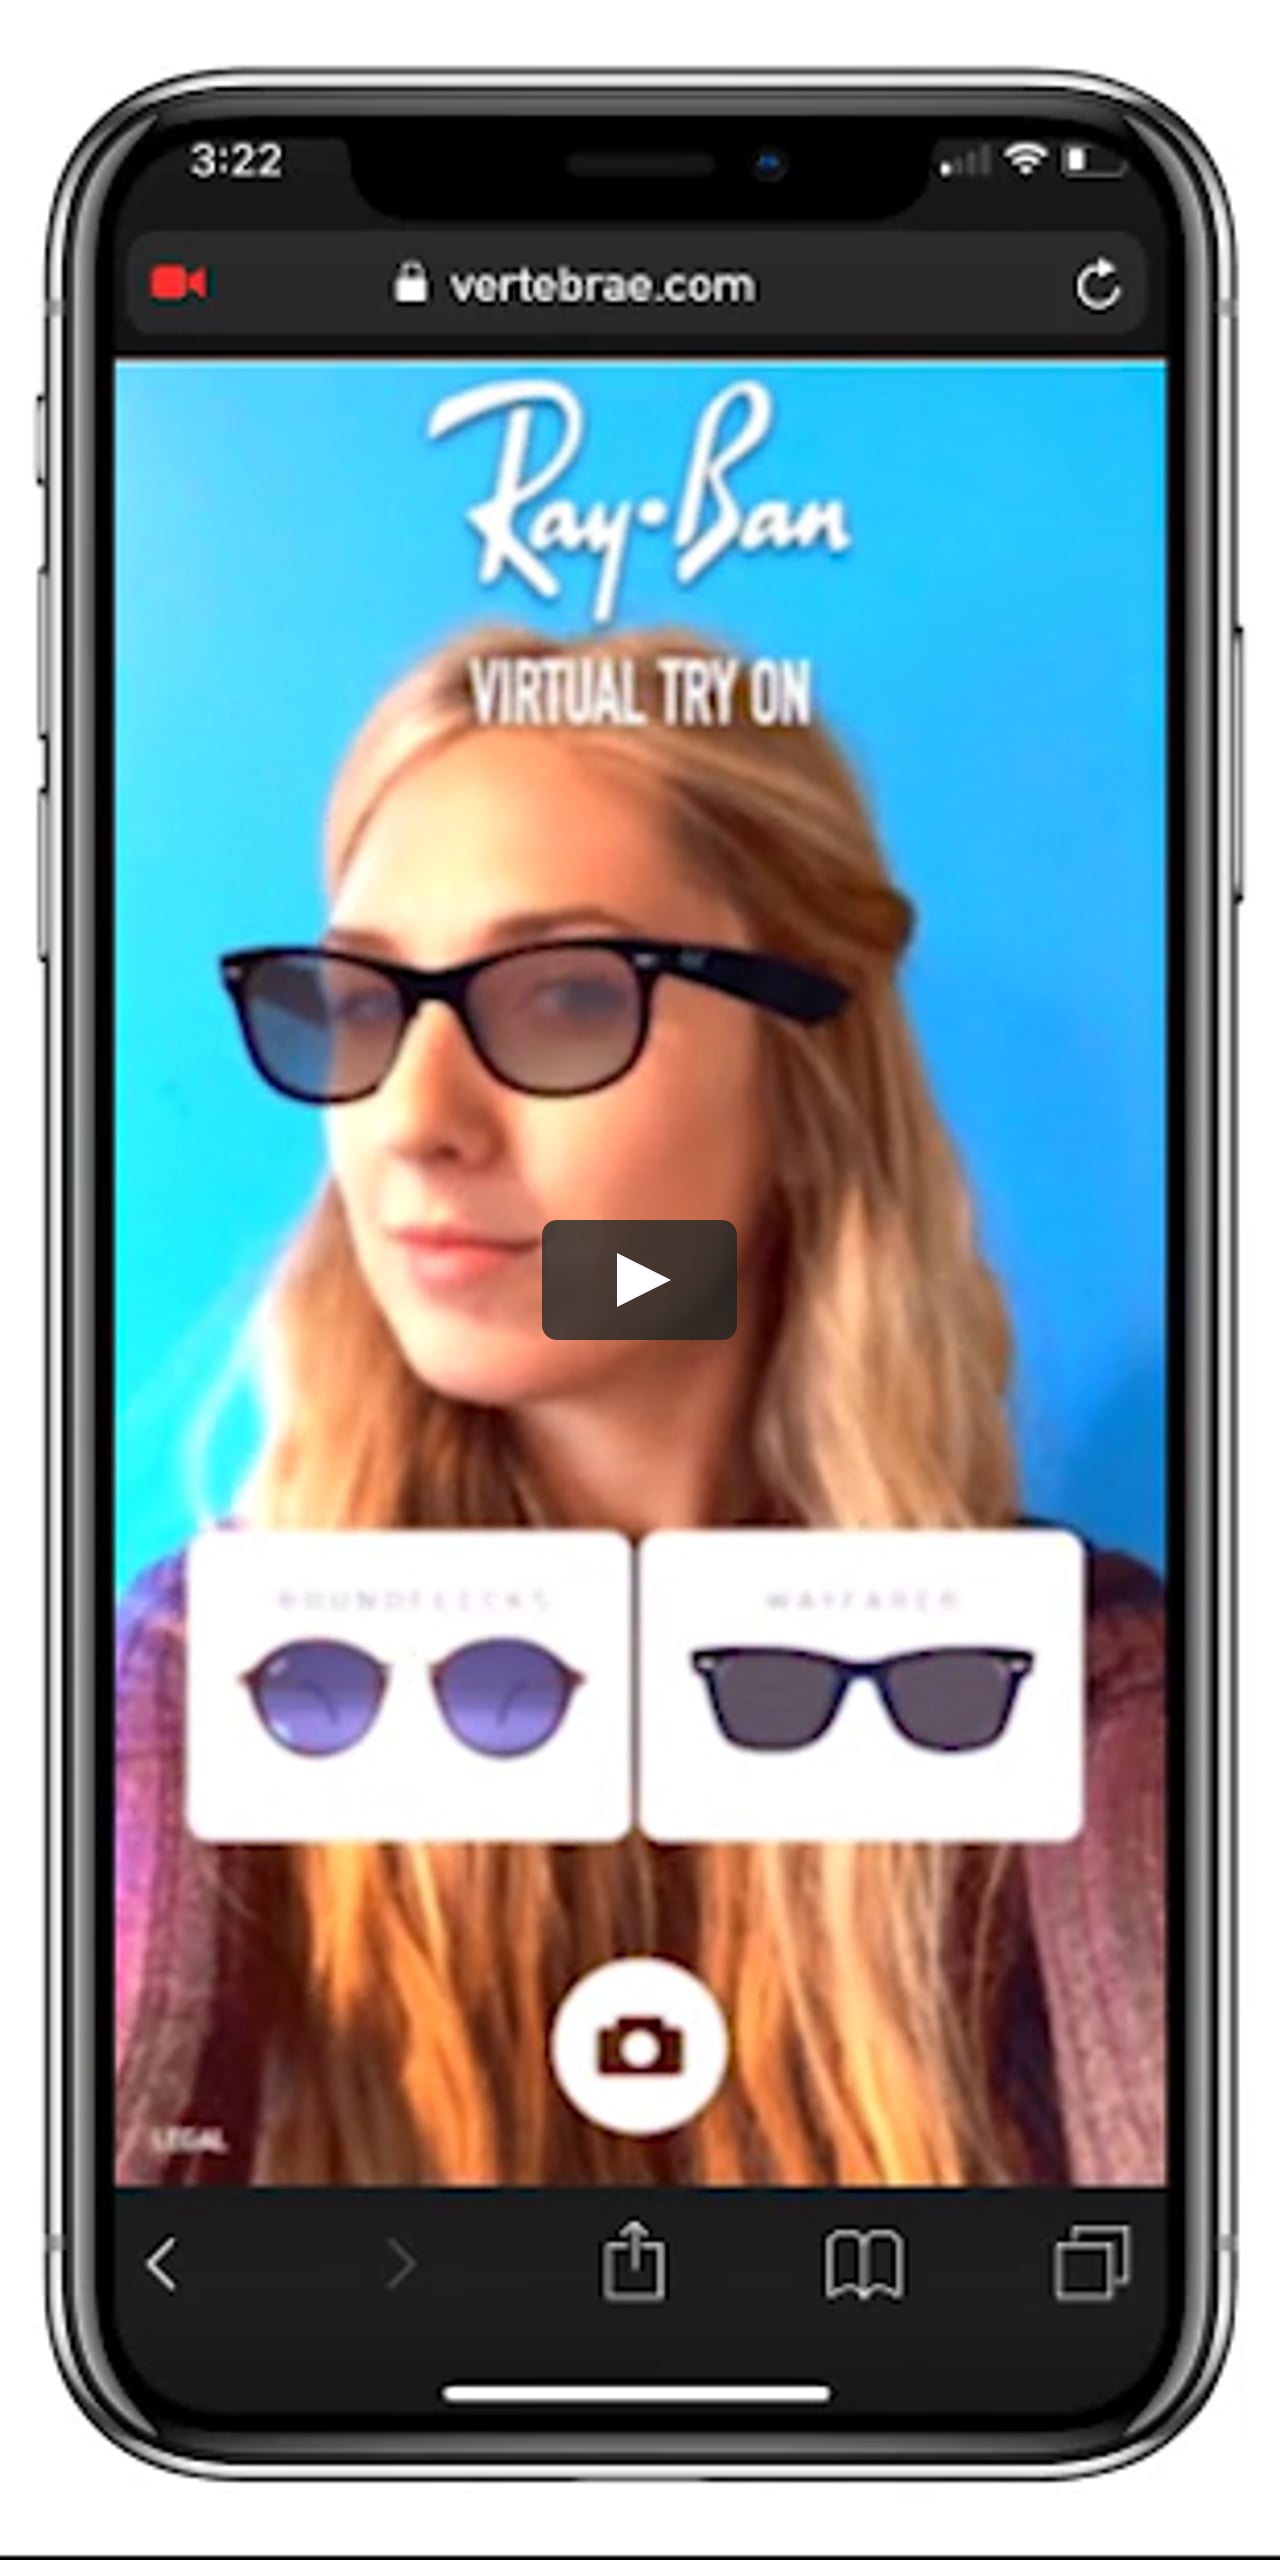 Virtual Try On - Ray-Ban AR Experience on Vimeo